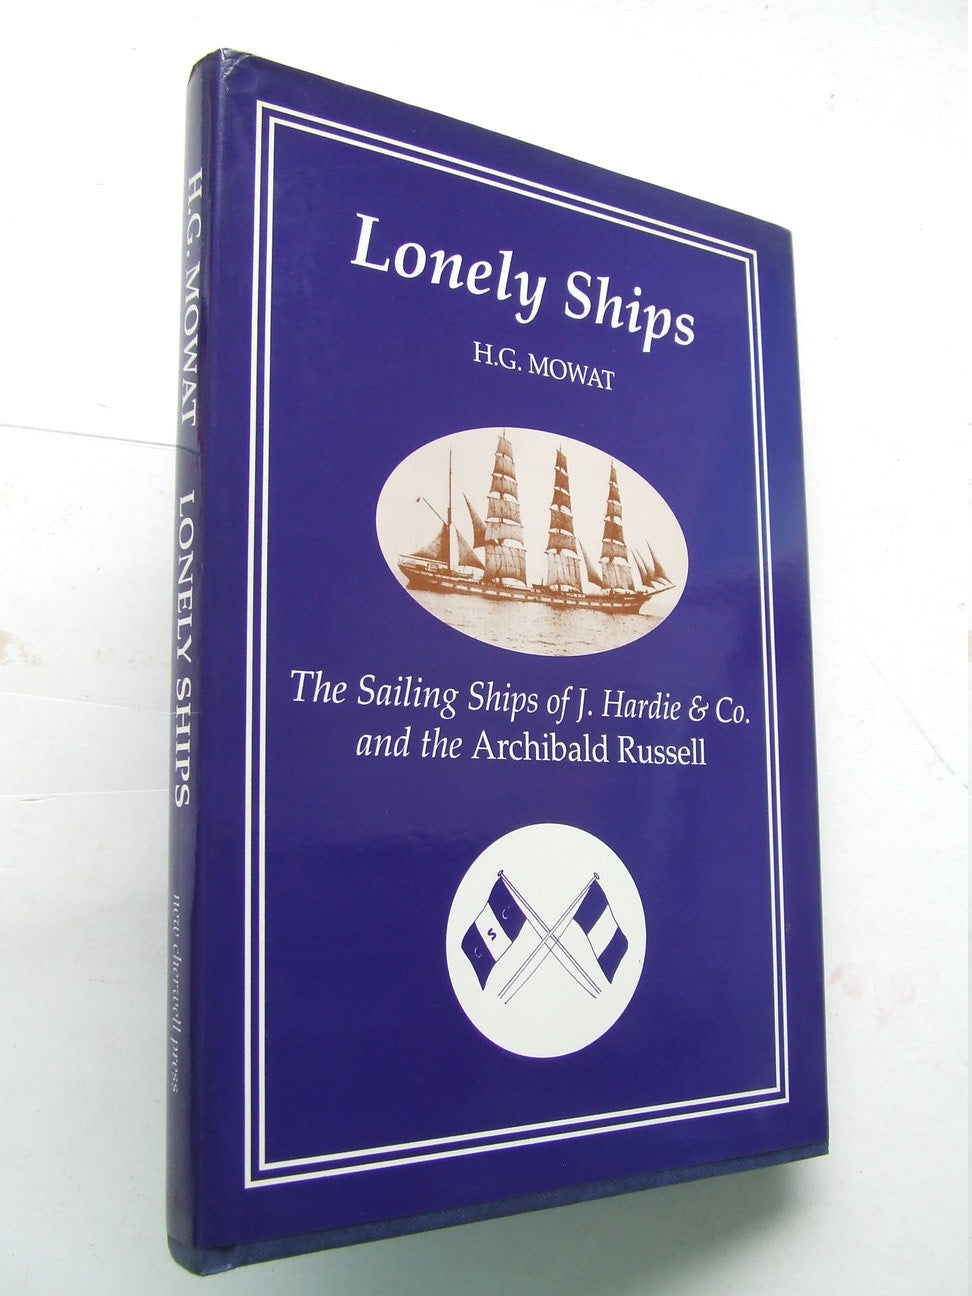 Lonely Ships